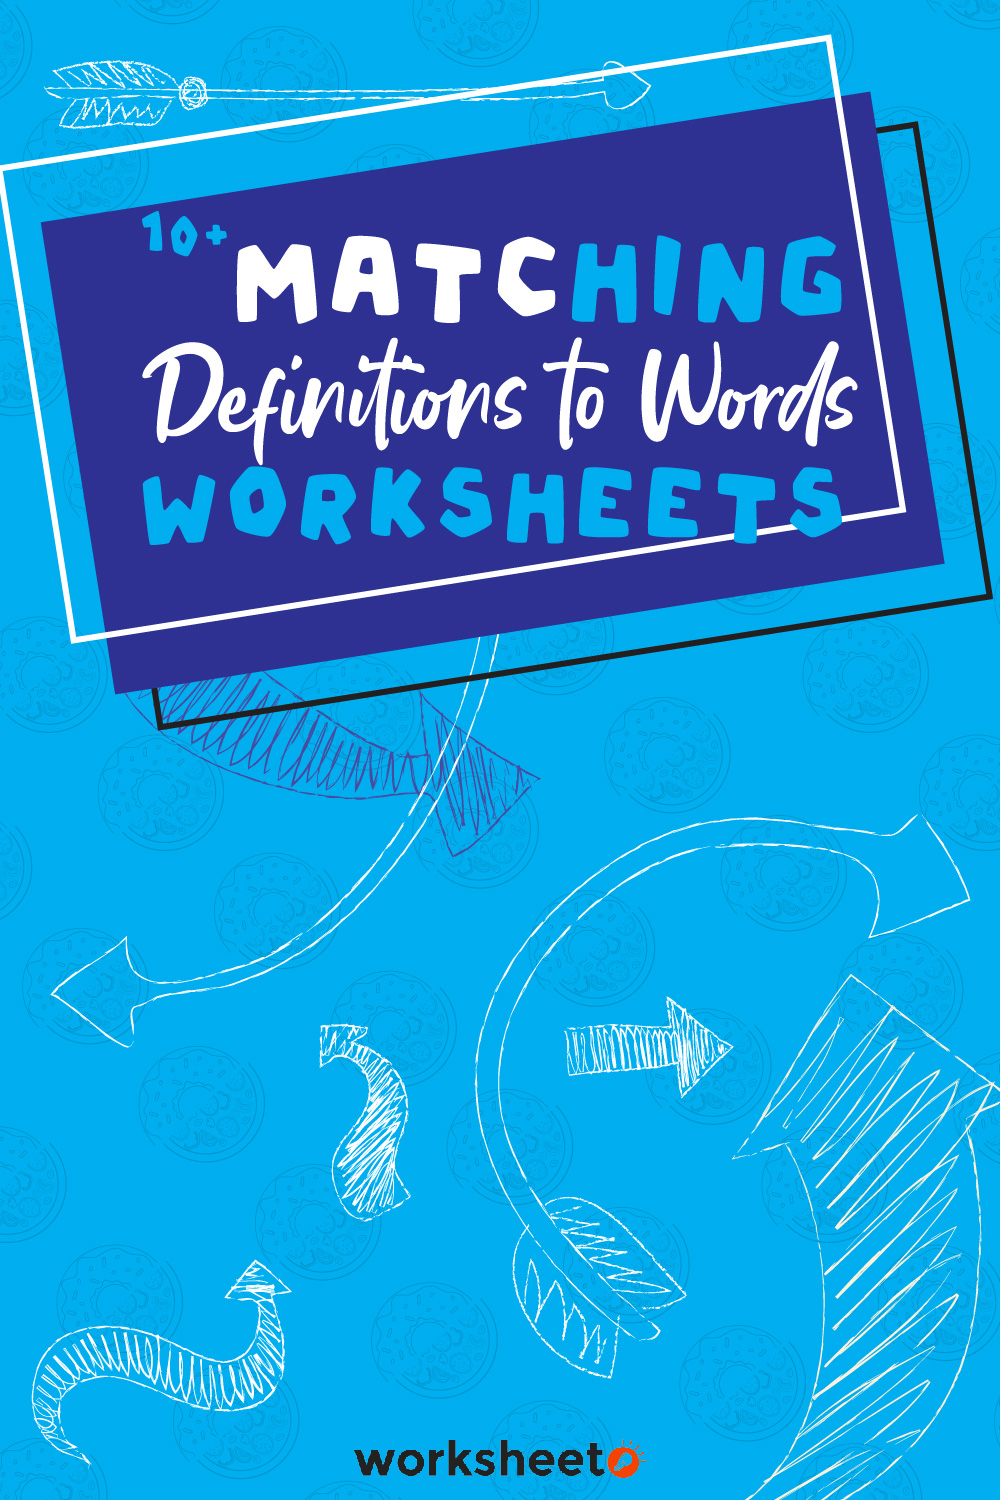 14 Images of Matching Definitions To Words Worksheets